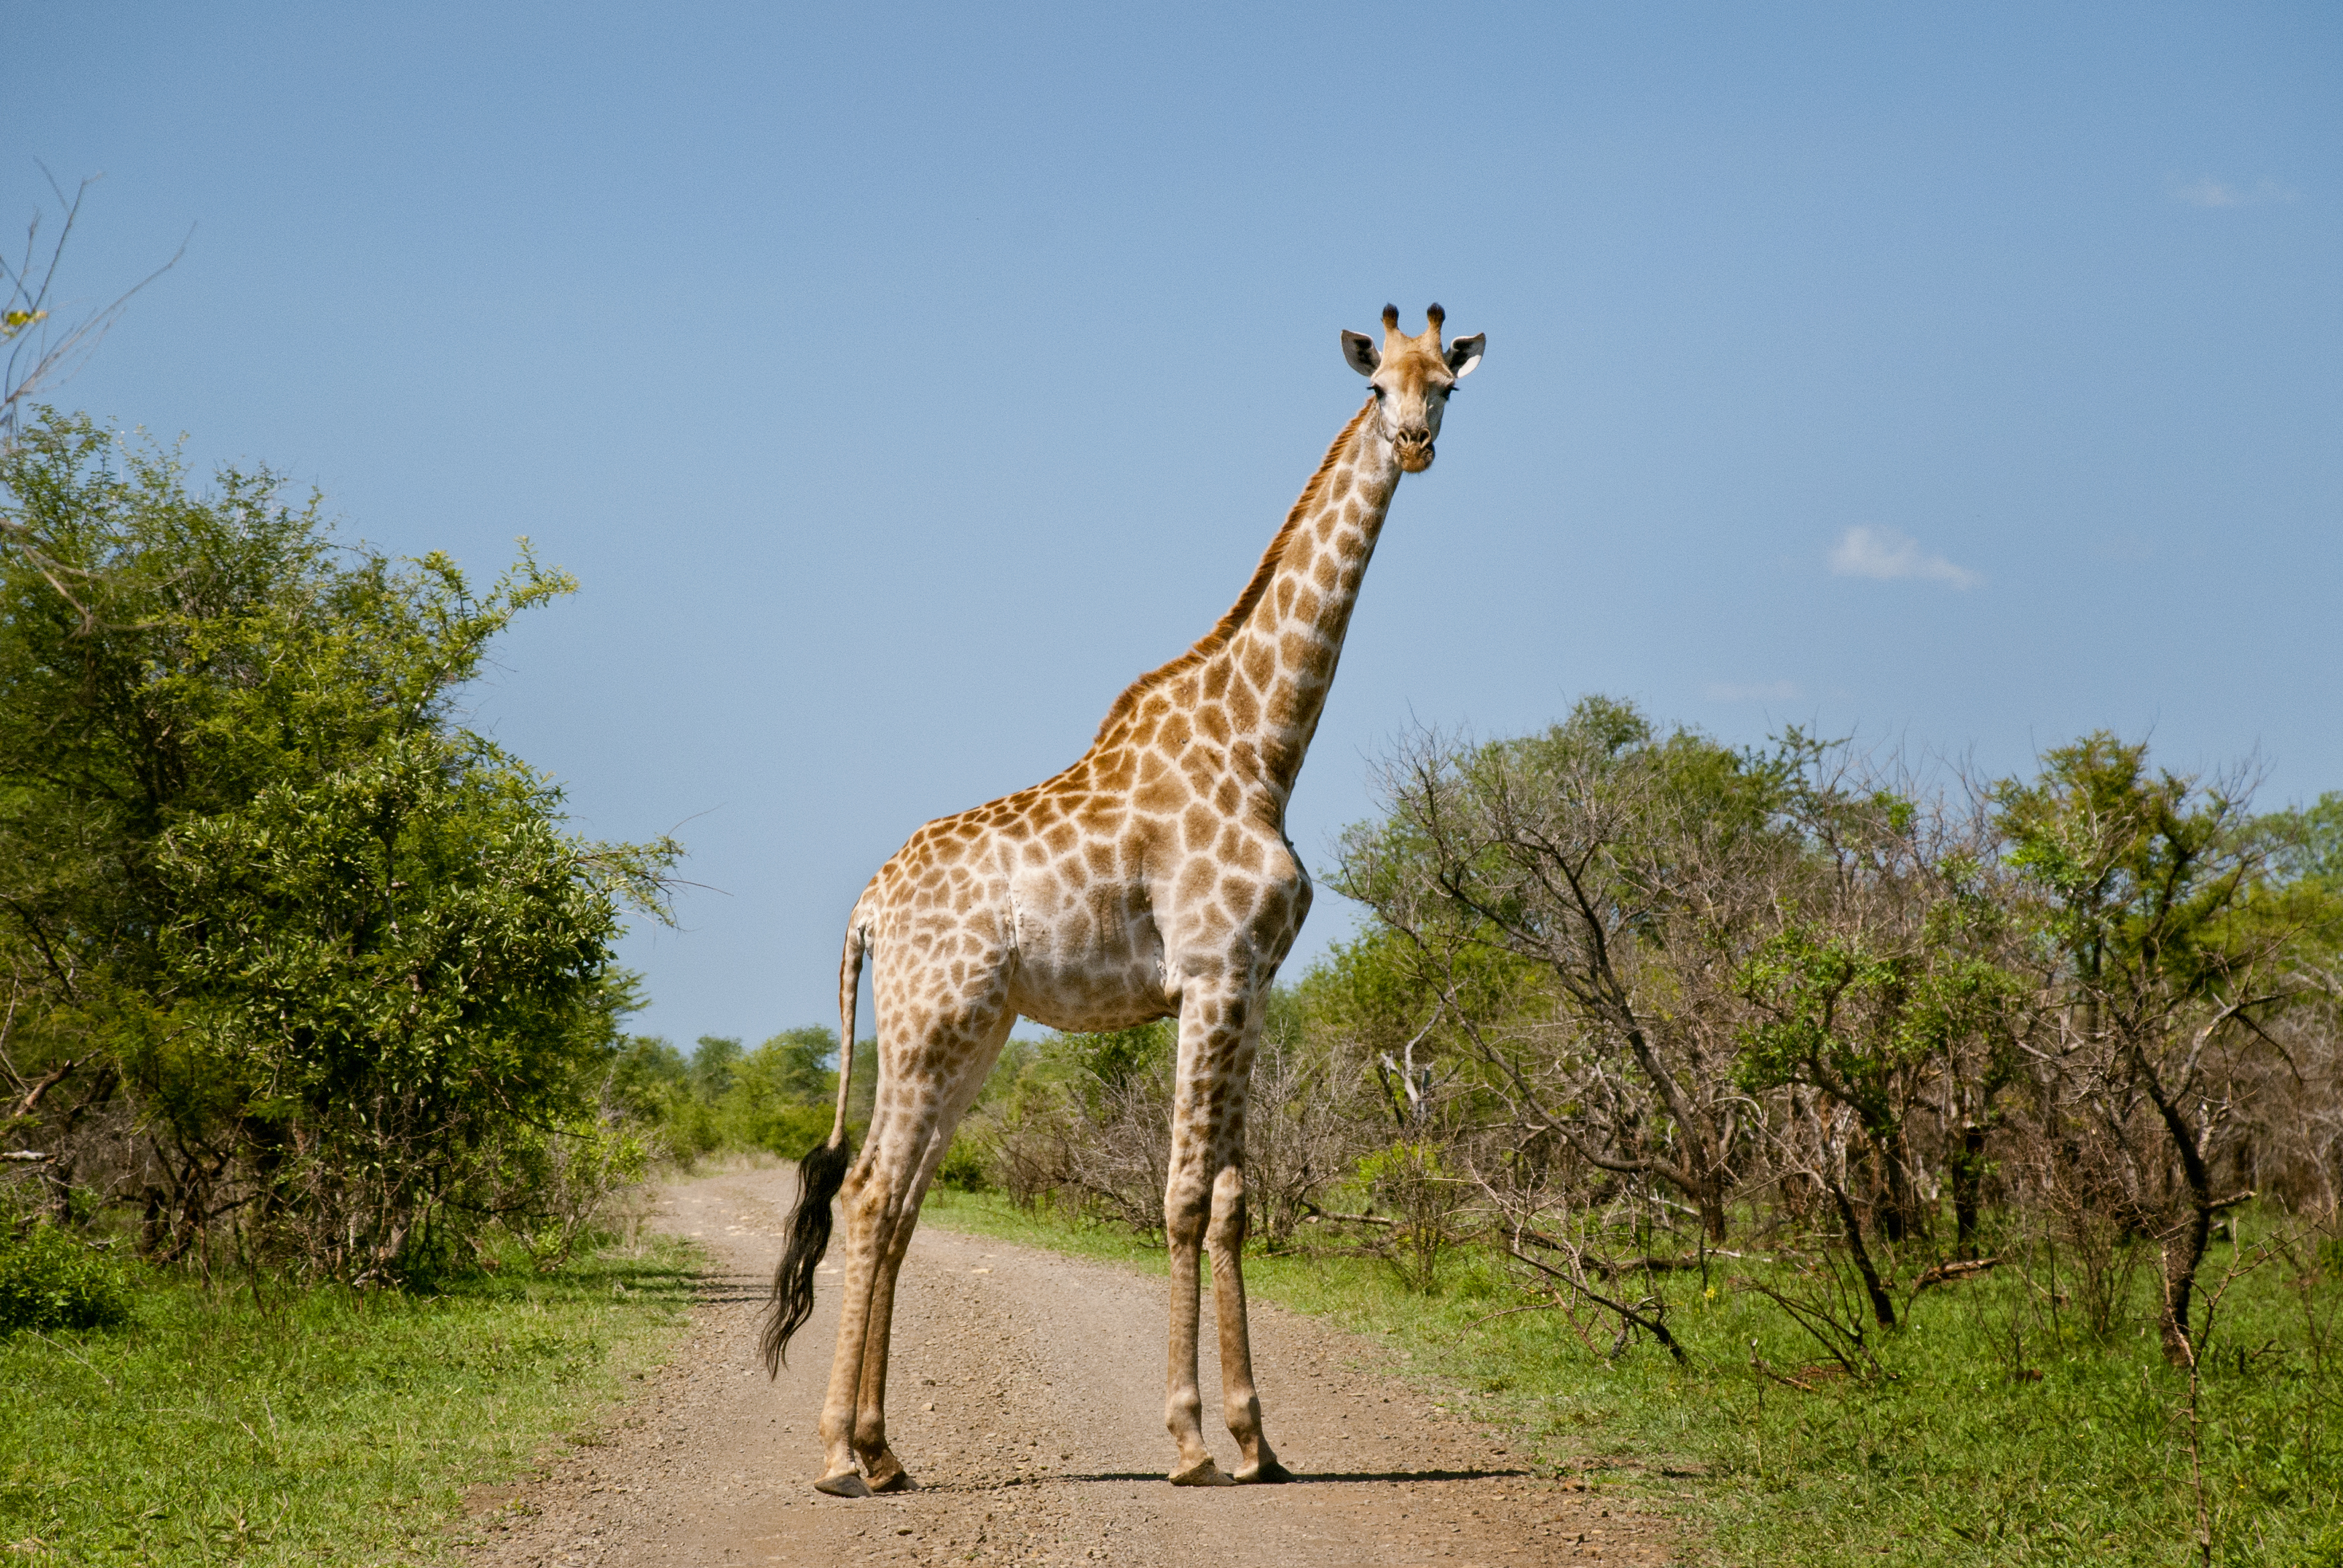 Giraffe in the middle of the road in Kruger National Park, South Africa